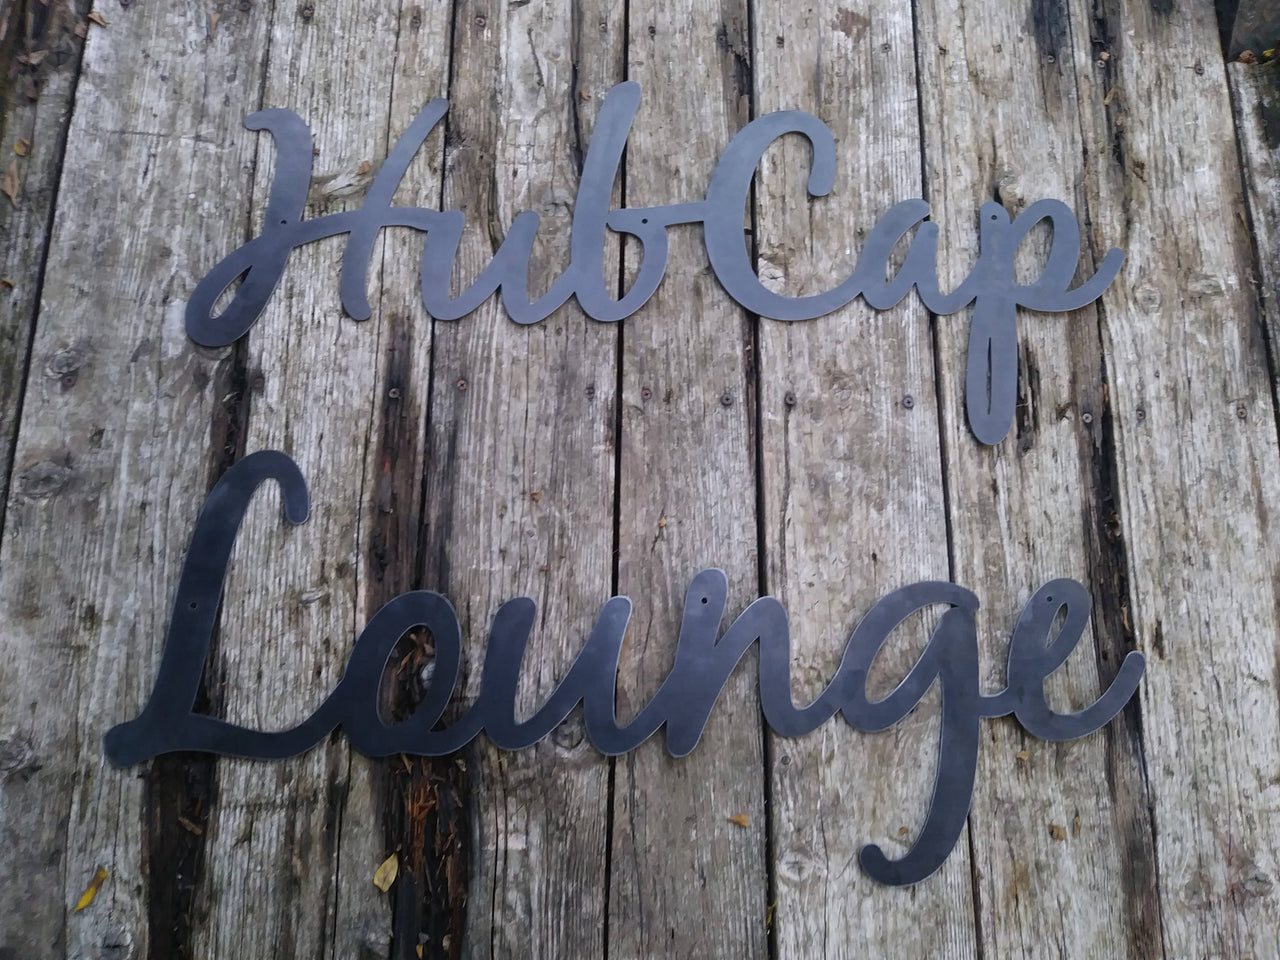 This is a custom metal cursive sign that is powder coated black and reads' "Hubcap Lounge".